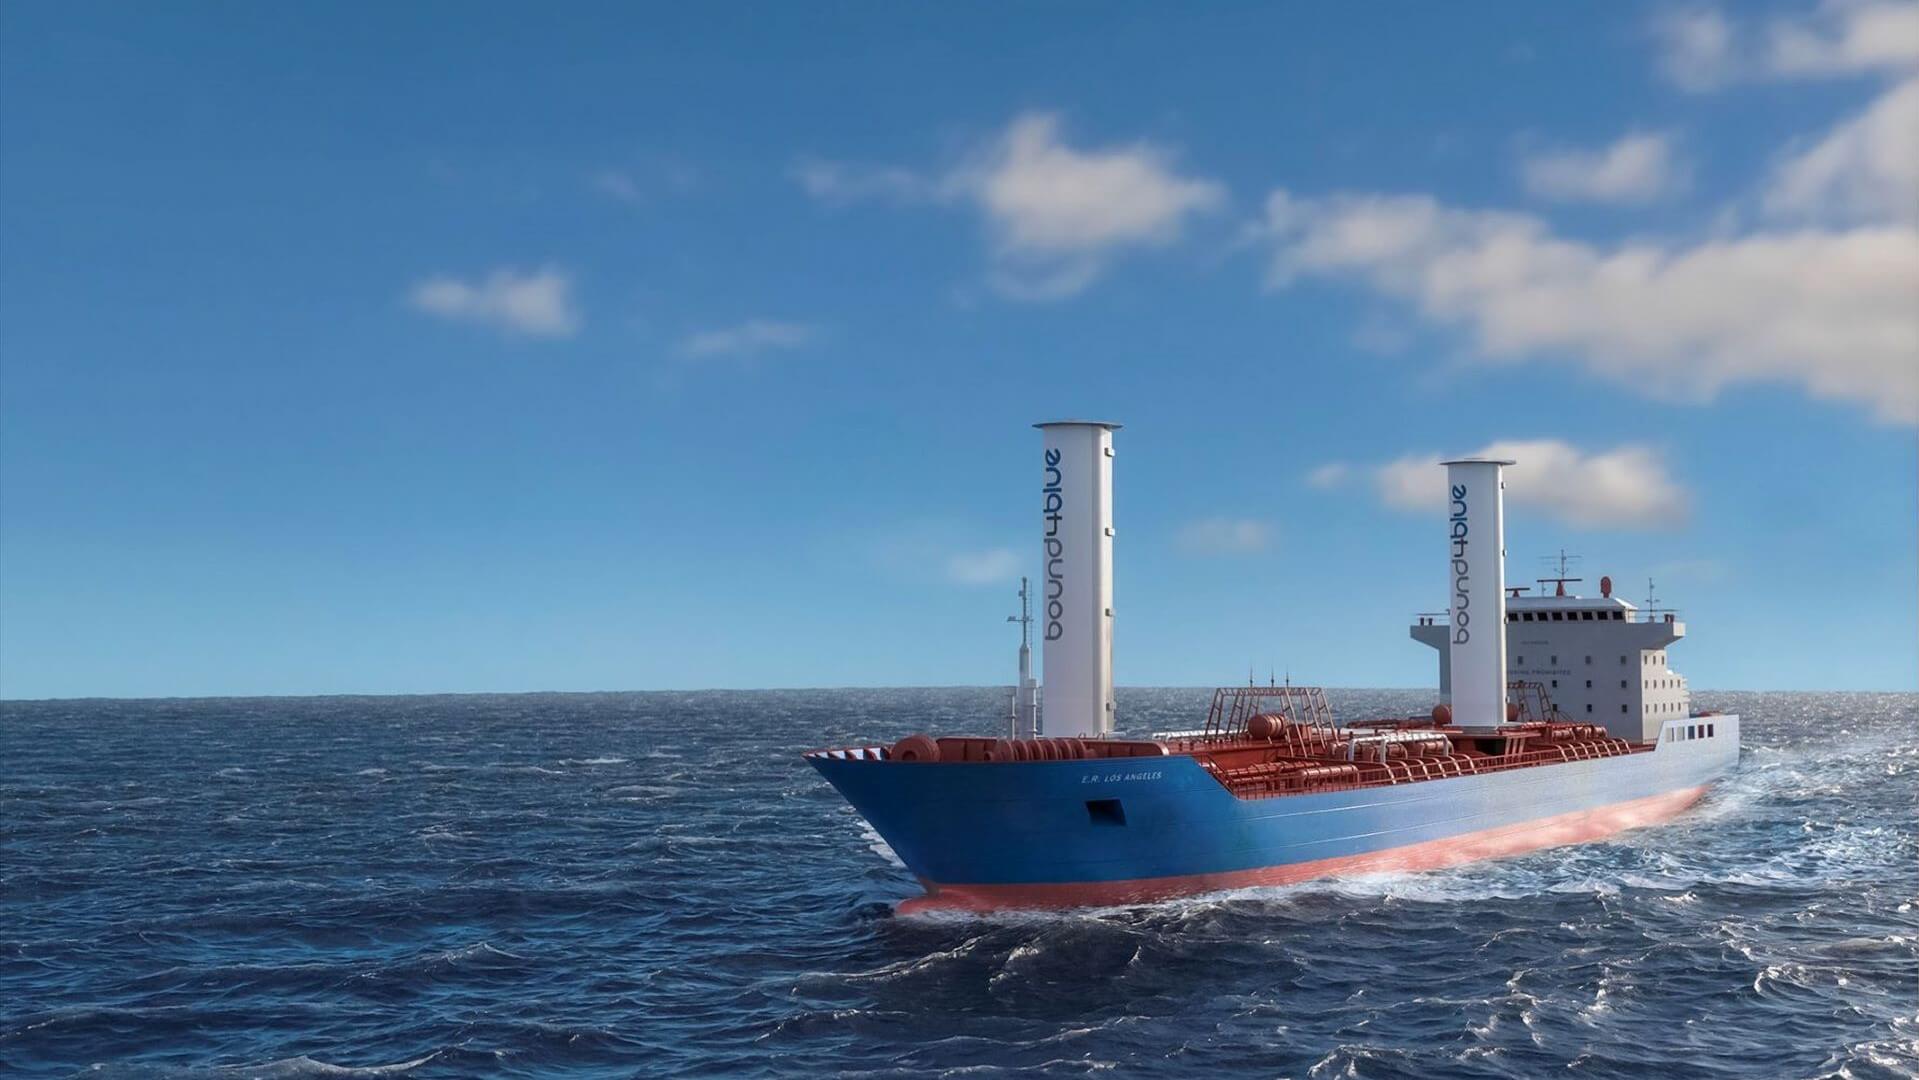 Artist's impression of new vessel concept with 2 rigid sails onboard ship sailing on sea